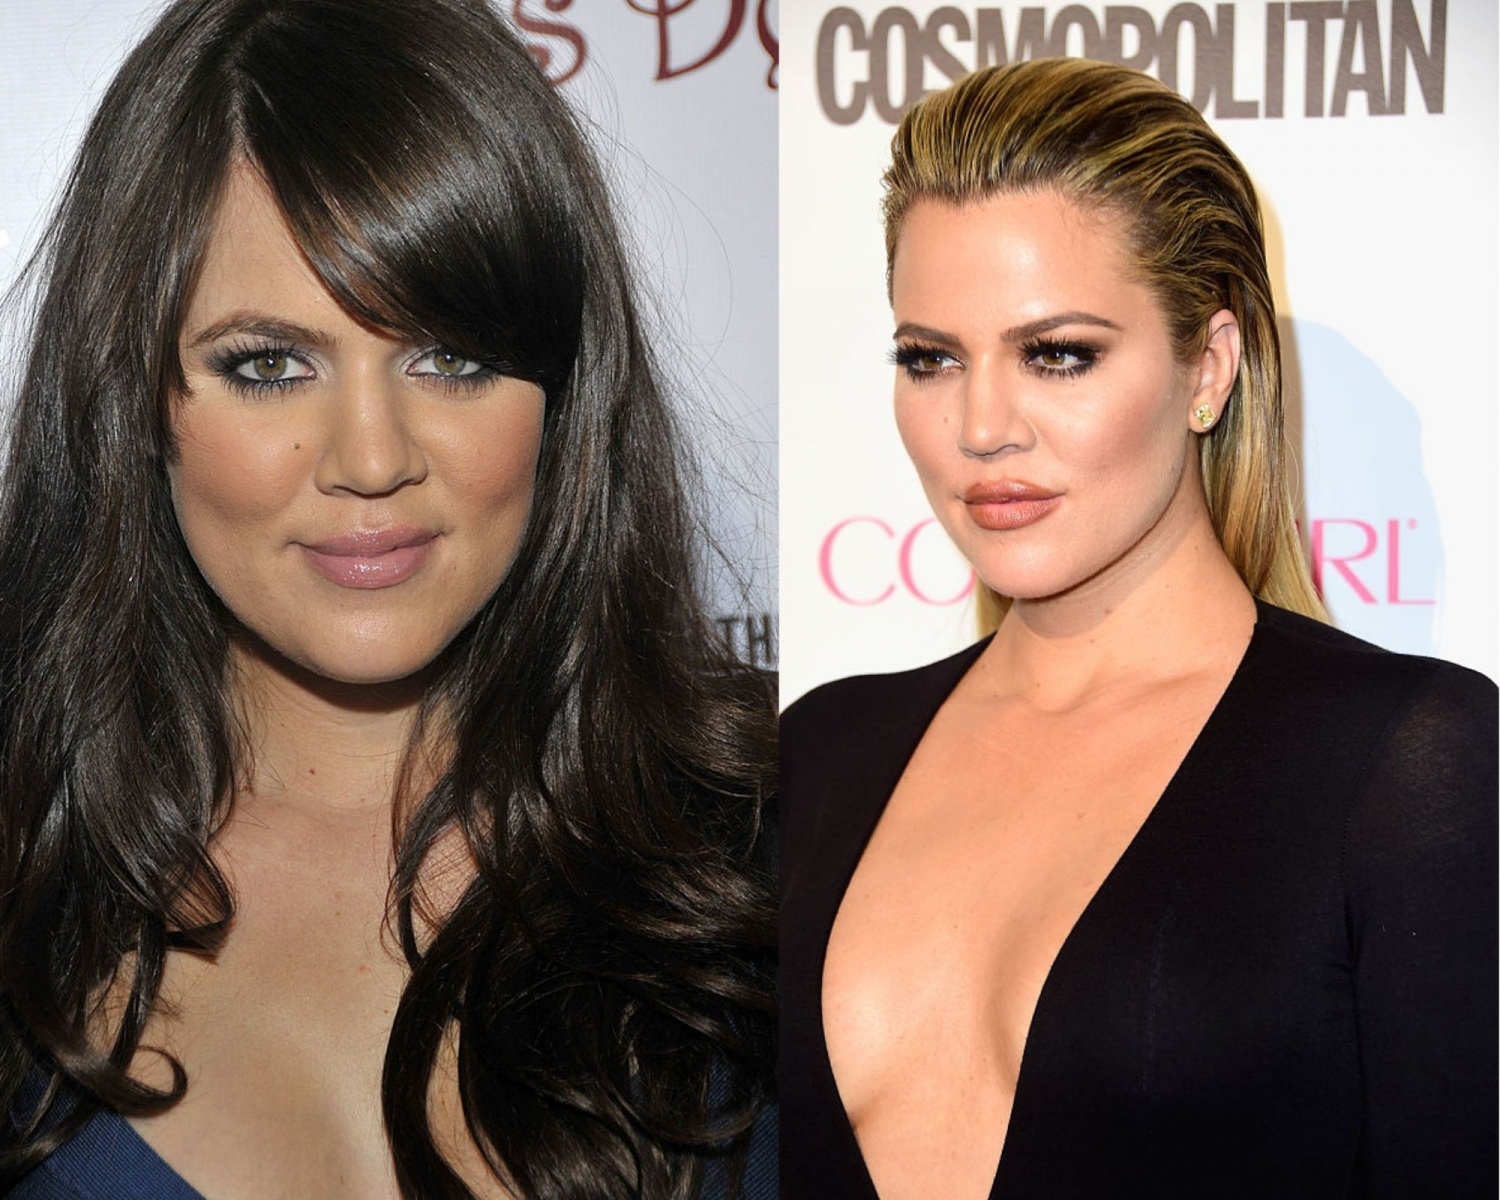 Khloe Kardashian Then And Now All The Surgeries She May Have Had Since 2008 According To Surgeon Photos Celebrities Enstars